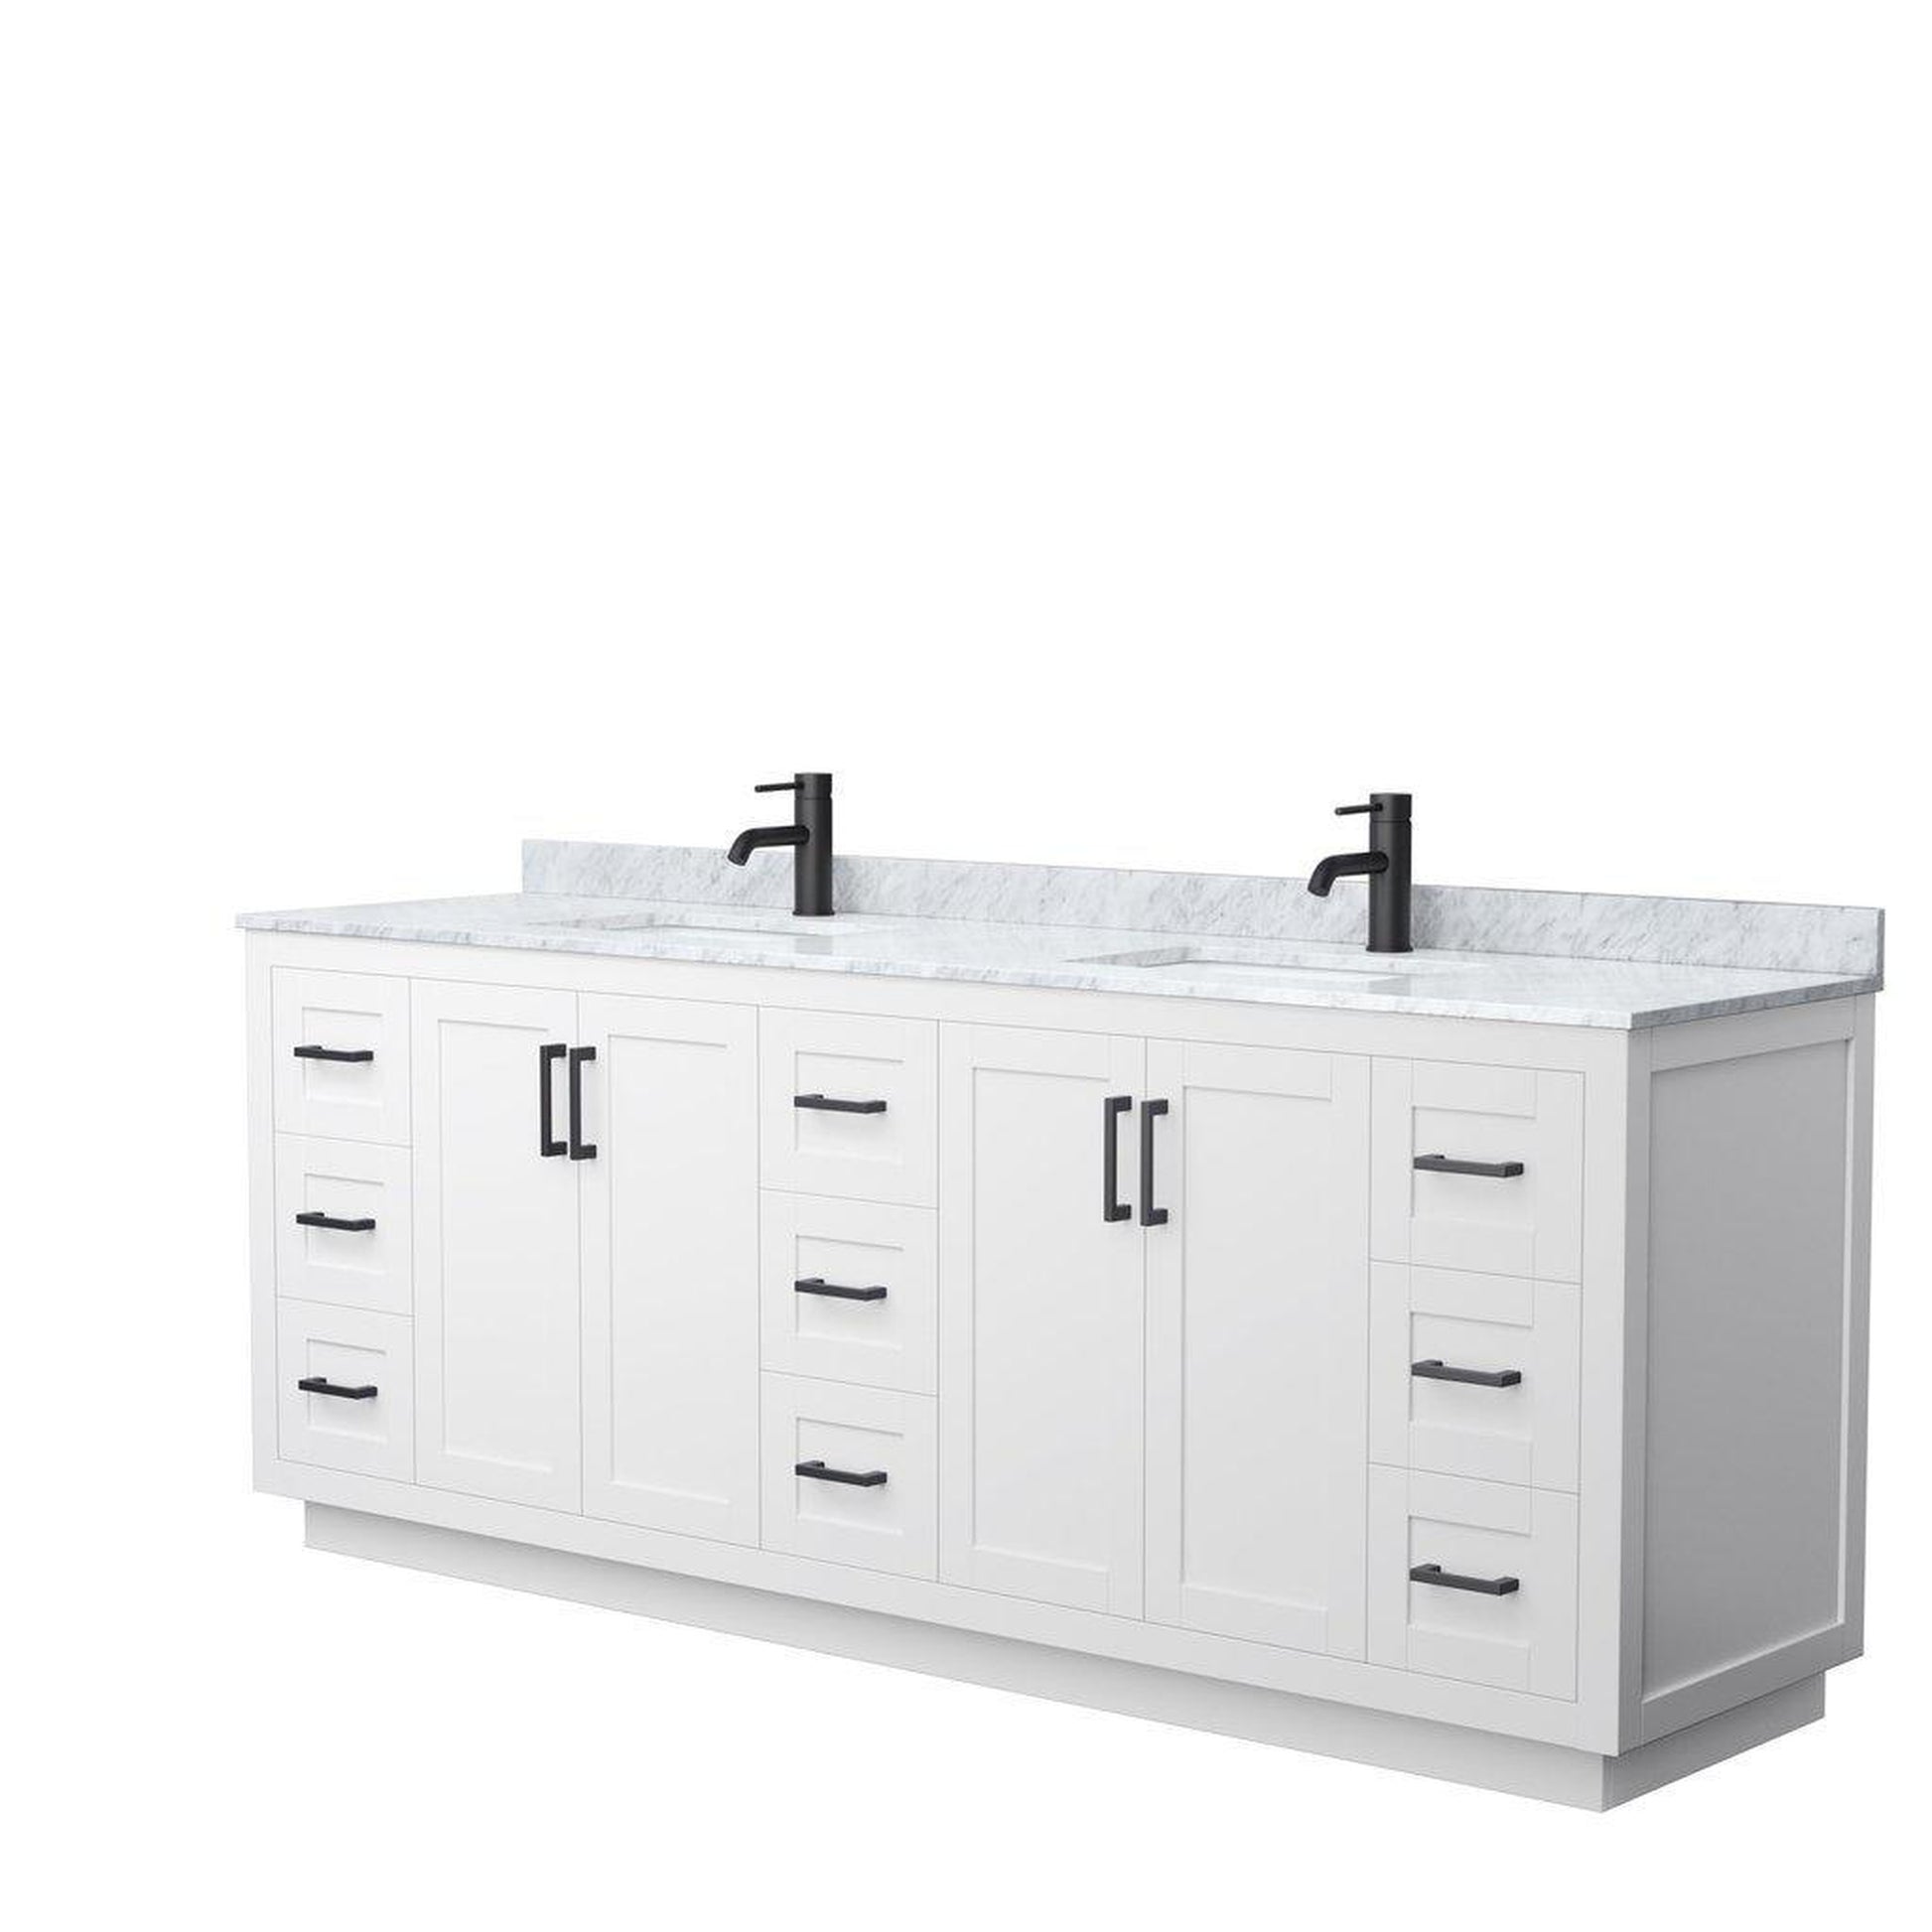 Wyndham Collection Miranda 84" Double Bathroom White Vanity Set With White Carrara Marble Countertop, Undermount Square Sink, And Matte Black Trim